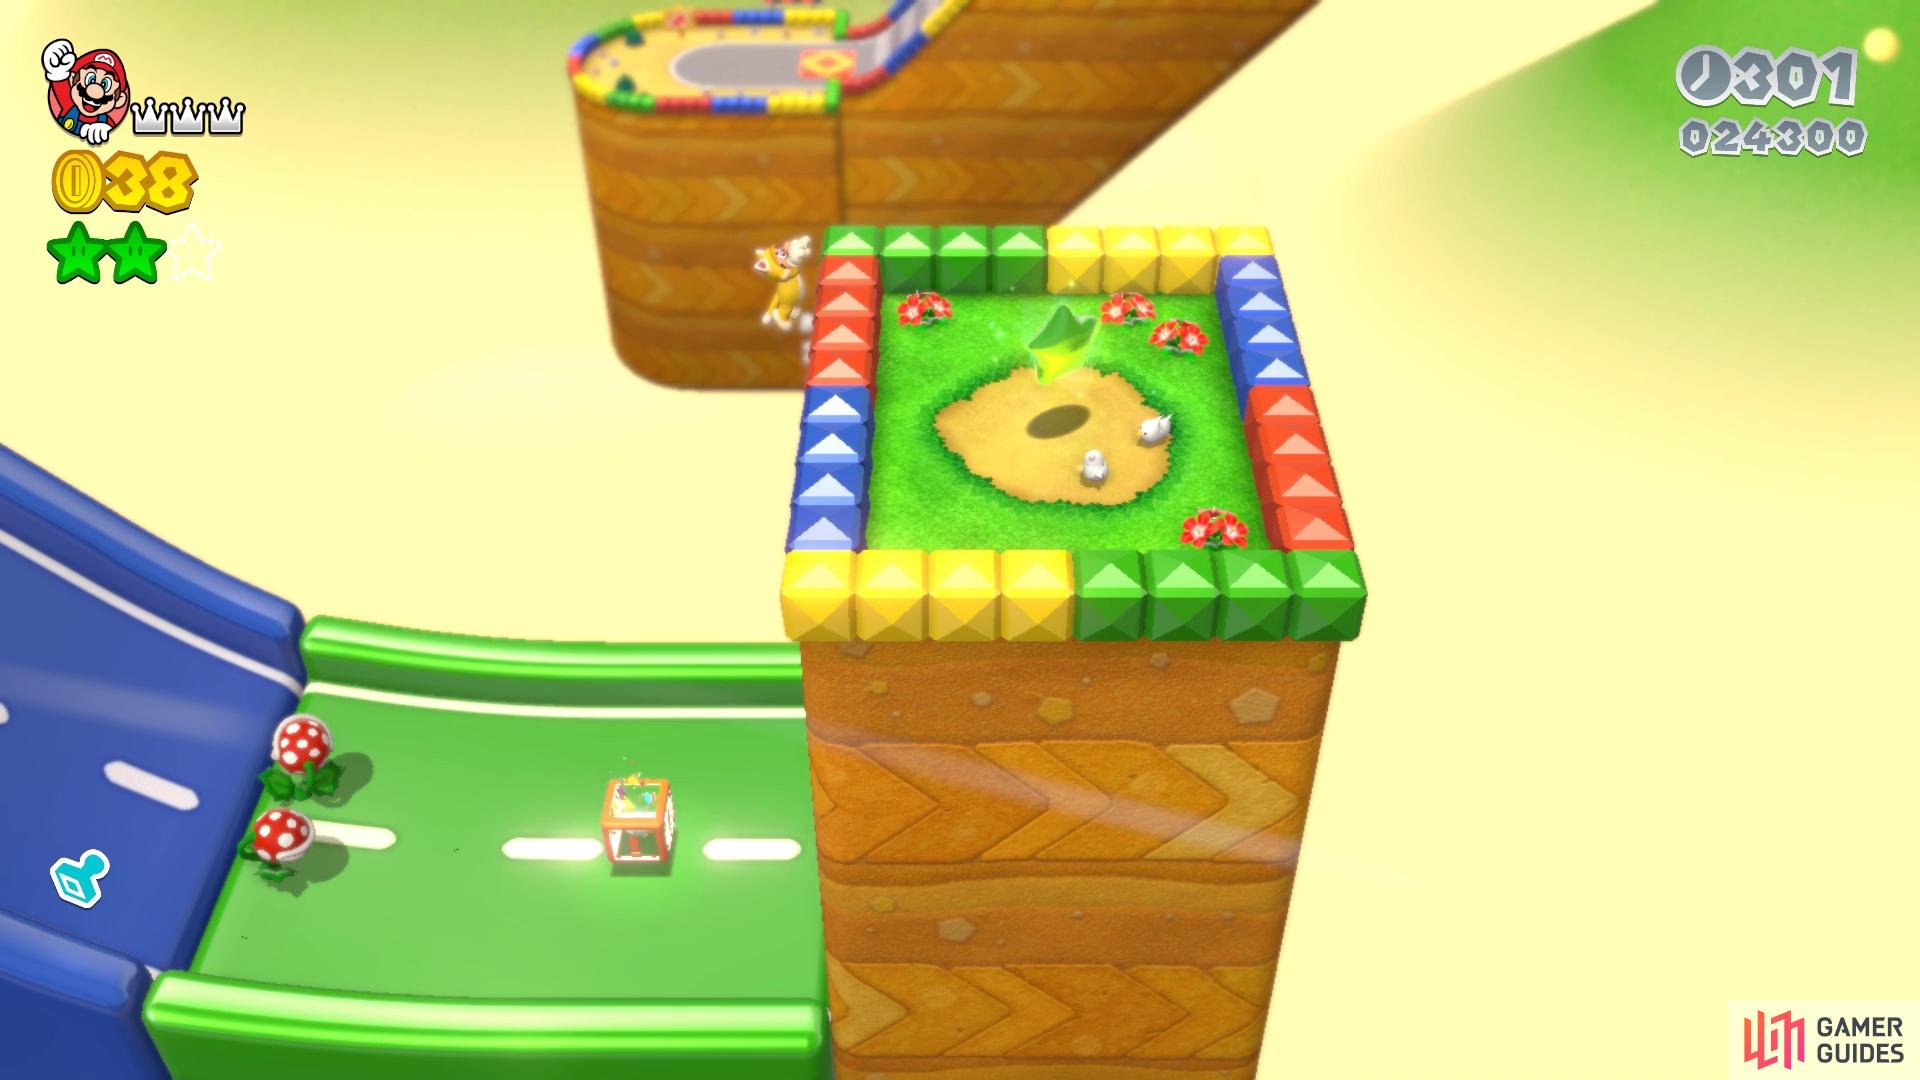 The third Green Star is at the end of this section and will need the Cat Suit to get to it